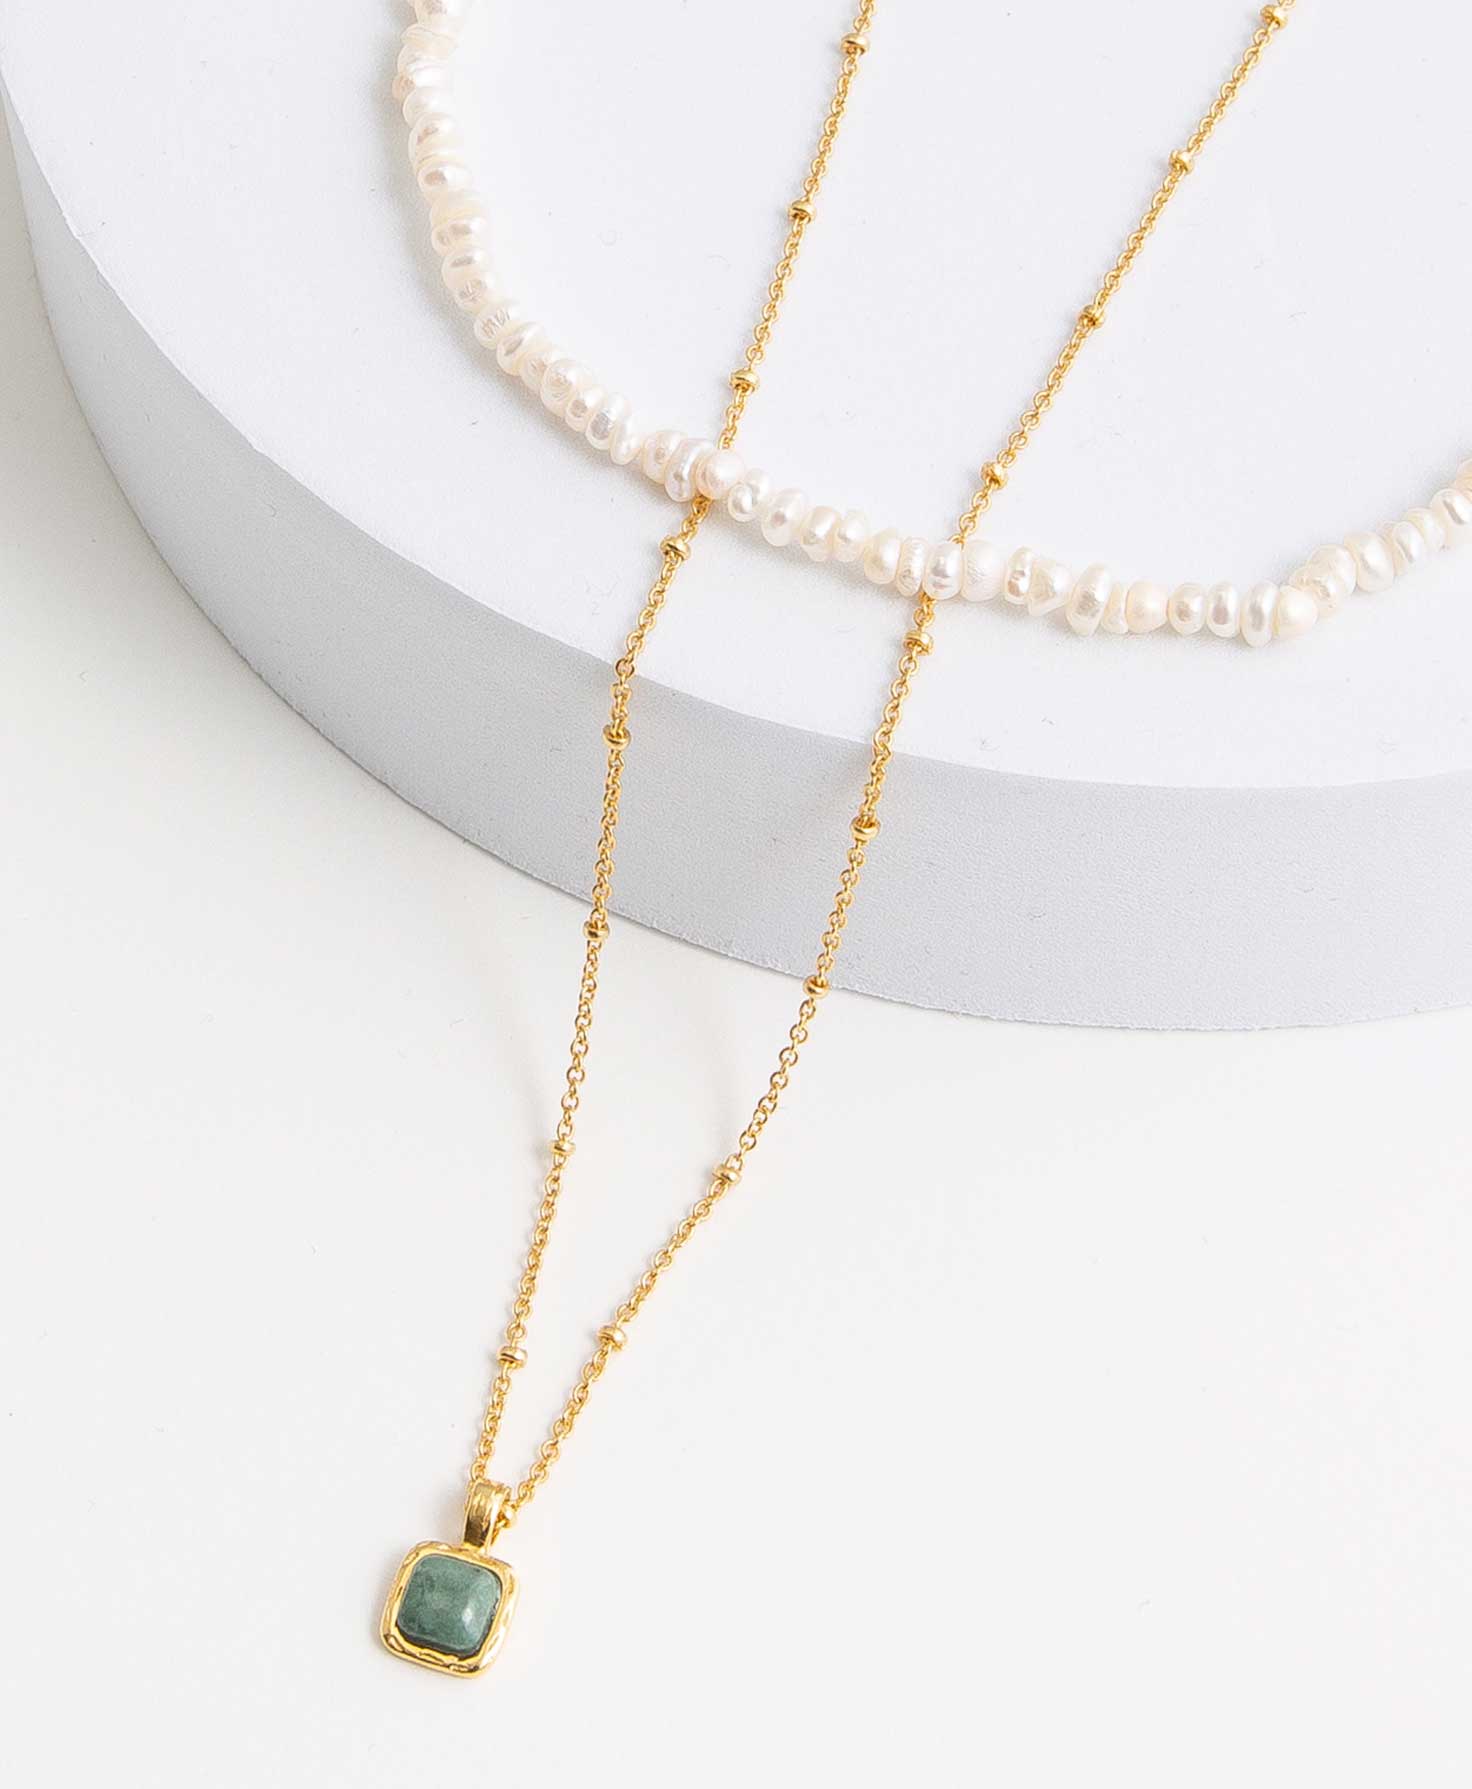 The two necklaces included in the Luster Necklace set lay draped on a white block. The shorter necklace is composed entirely of a string of shining pearls with a natural, imperfect shape. The longer necklace is a gold chain necklace with small brass beads spaced out along the length of the chain. At the bottom is a small pendant with a square of smooth, forest green marble outlined in brass.